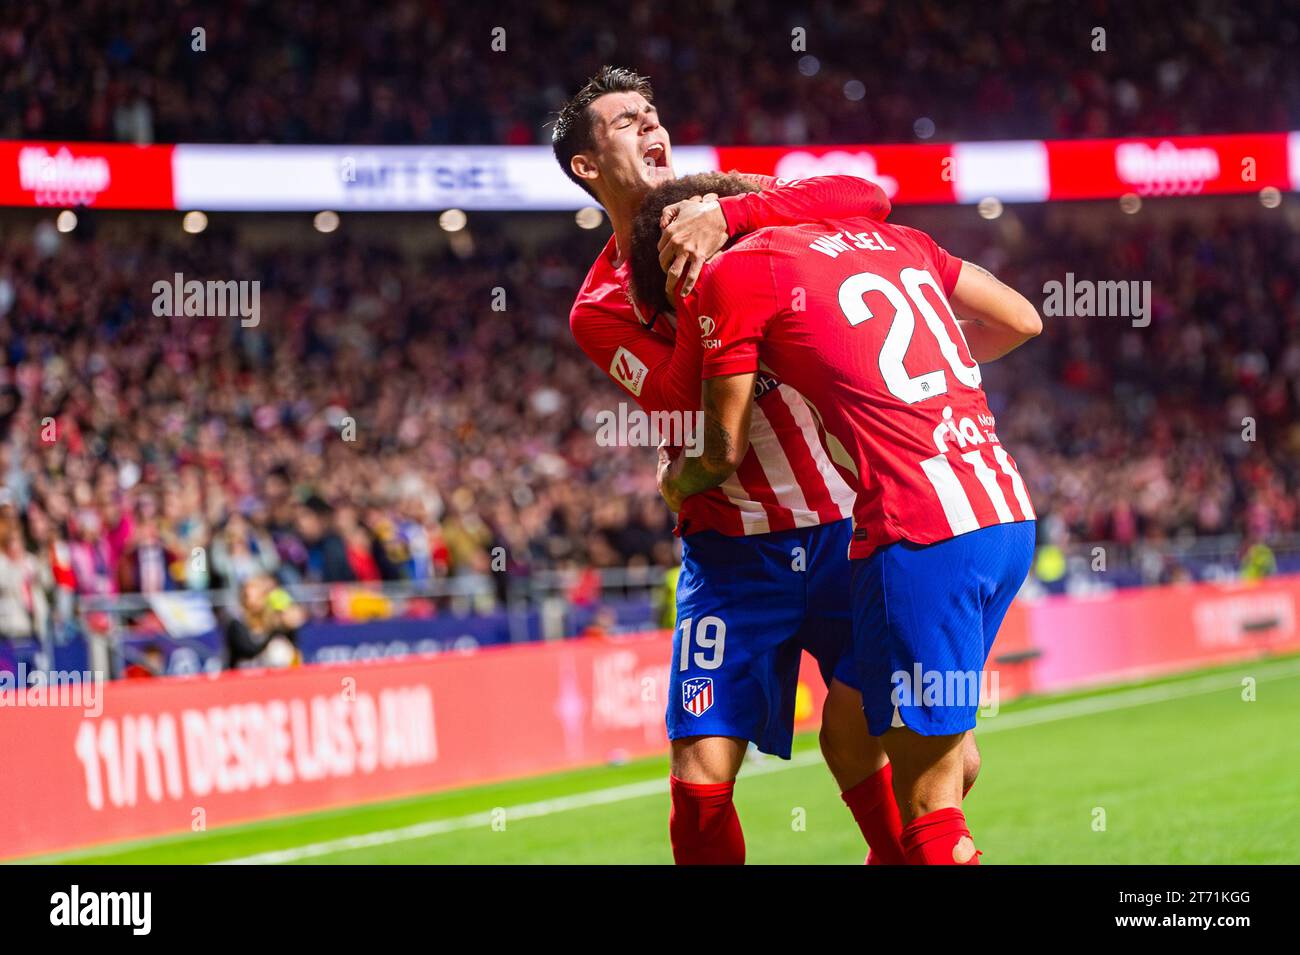 Madrid, Spain. 12th Nov, 2023. Axel Witsel (R) and Alvaro Morata (L) of Atletico Madrid seen celebrating a goal during the La Liga EA Sports 2022/23 football match between Atletico Madrid vs Villareal at Metropolitano stadium. Atletico Madrid 3:1 Villareal Credit: SOPA Images Limited/Alamy Live News Stock Photo